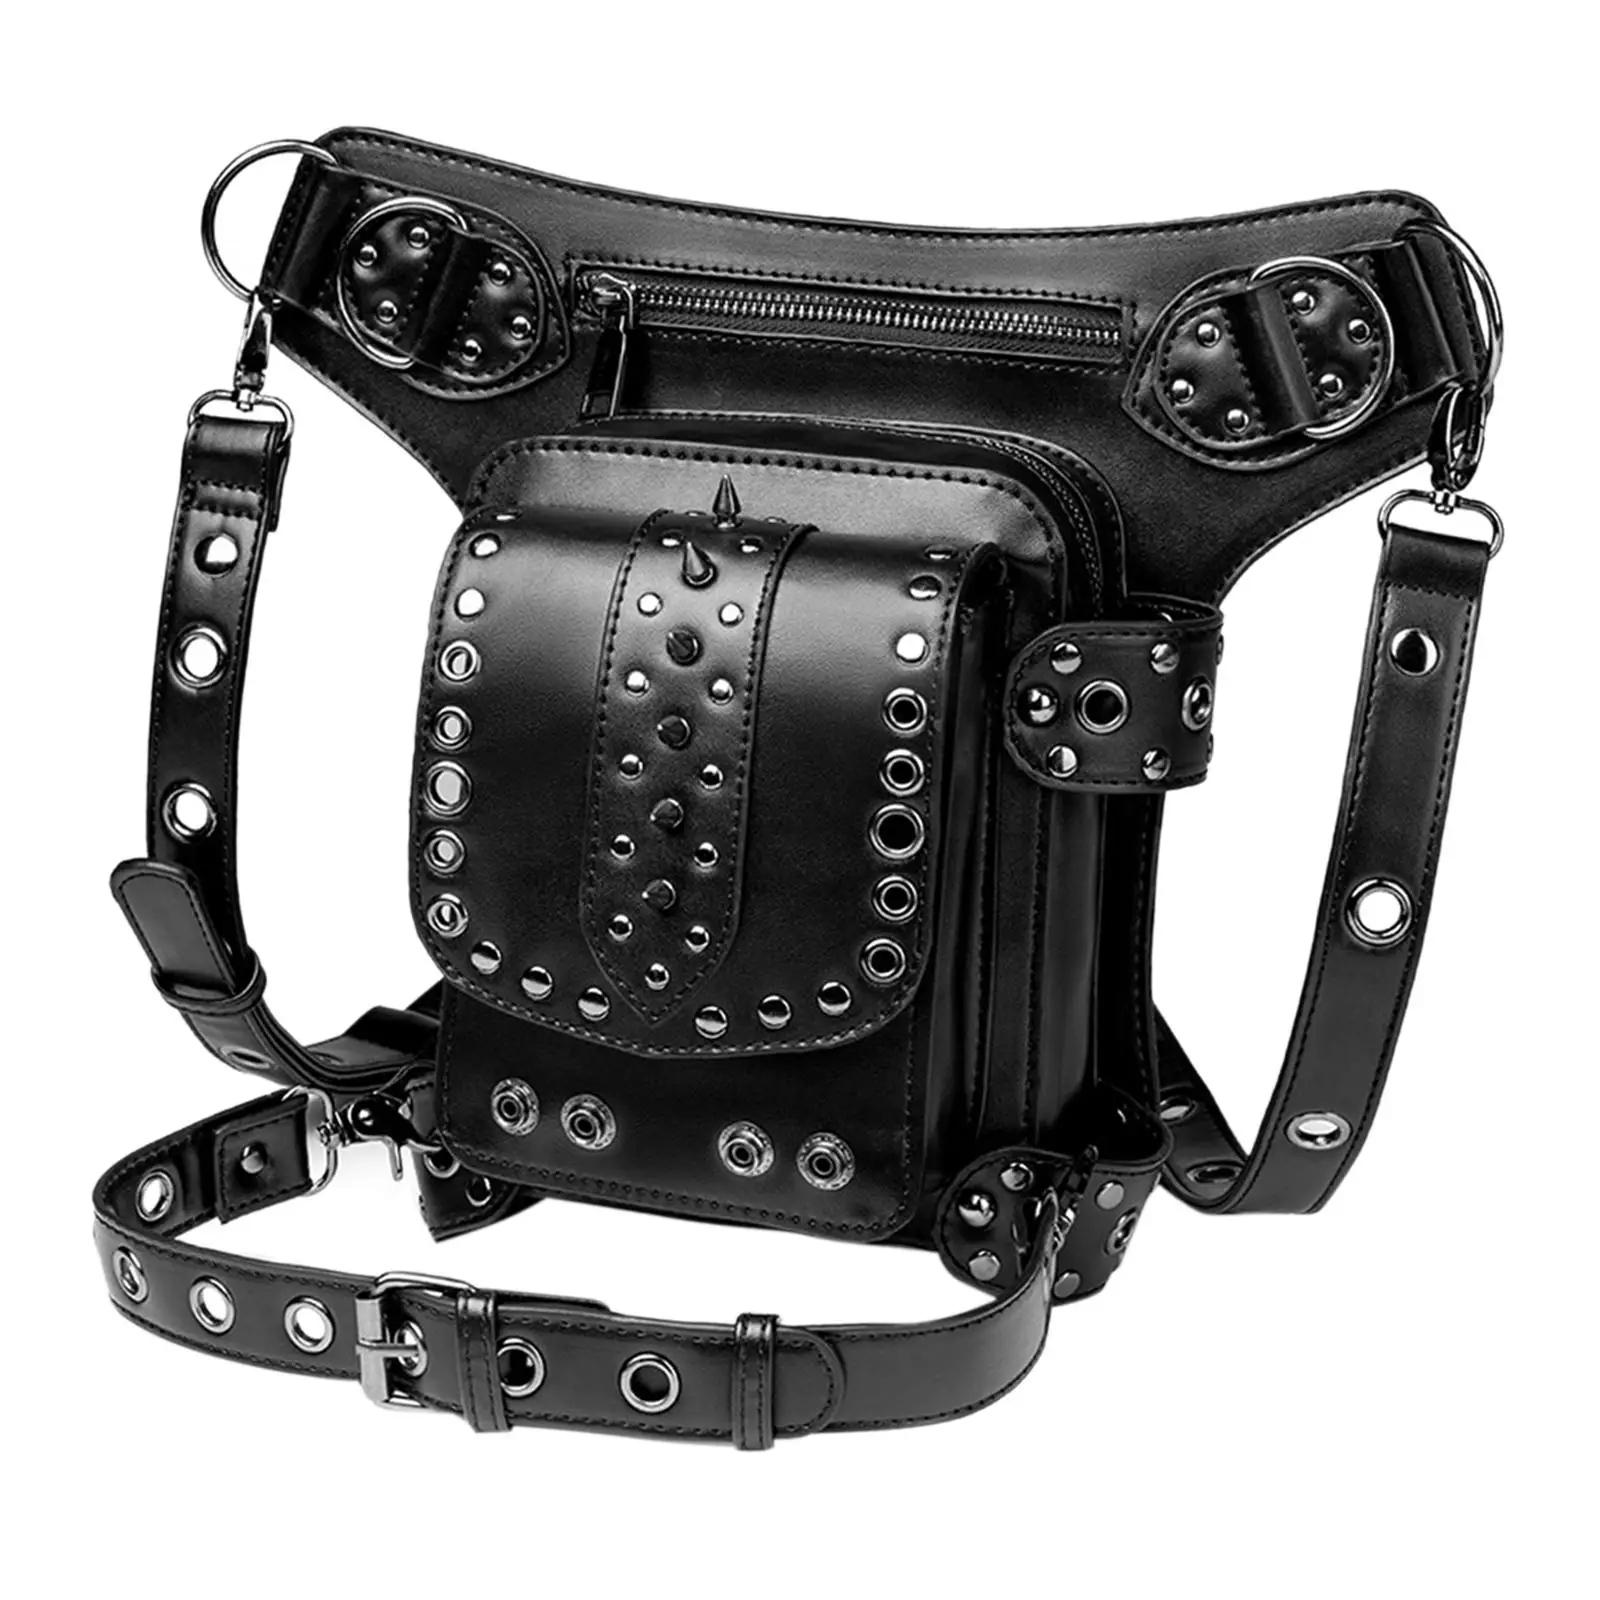 Steampunk Waist Bag Satchel Hip Bag with Detachable Adjustable Strap Retro Style Thigh Waist Pack for Travel Climbing Motorcycle